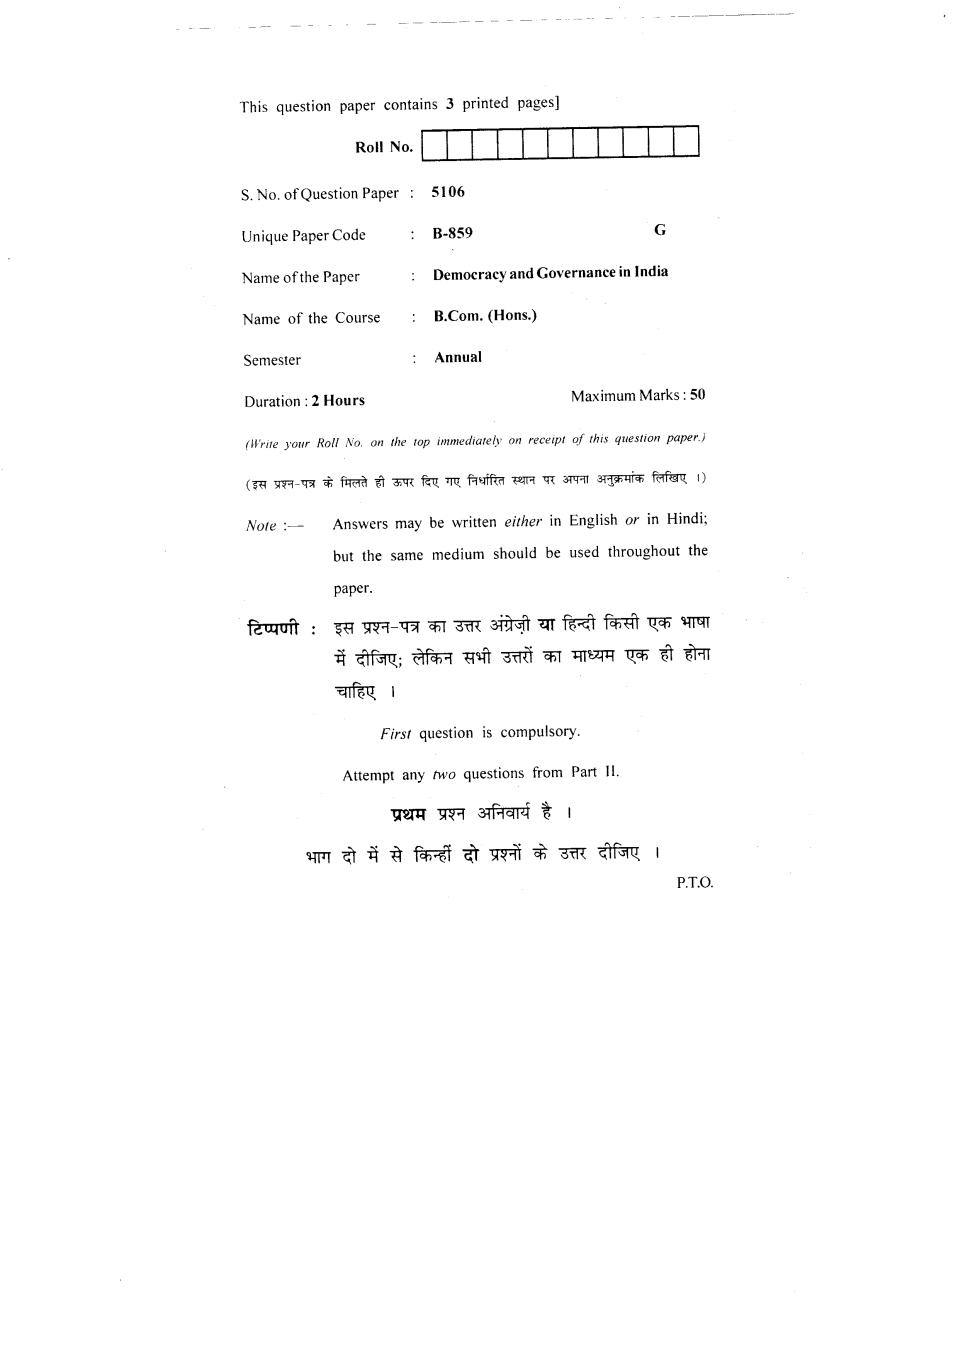 DU SOL Question Paper 2018 B.Com (Hons.) Democracy and Governance in India - Page 1